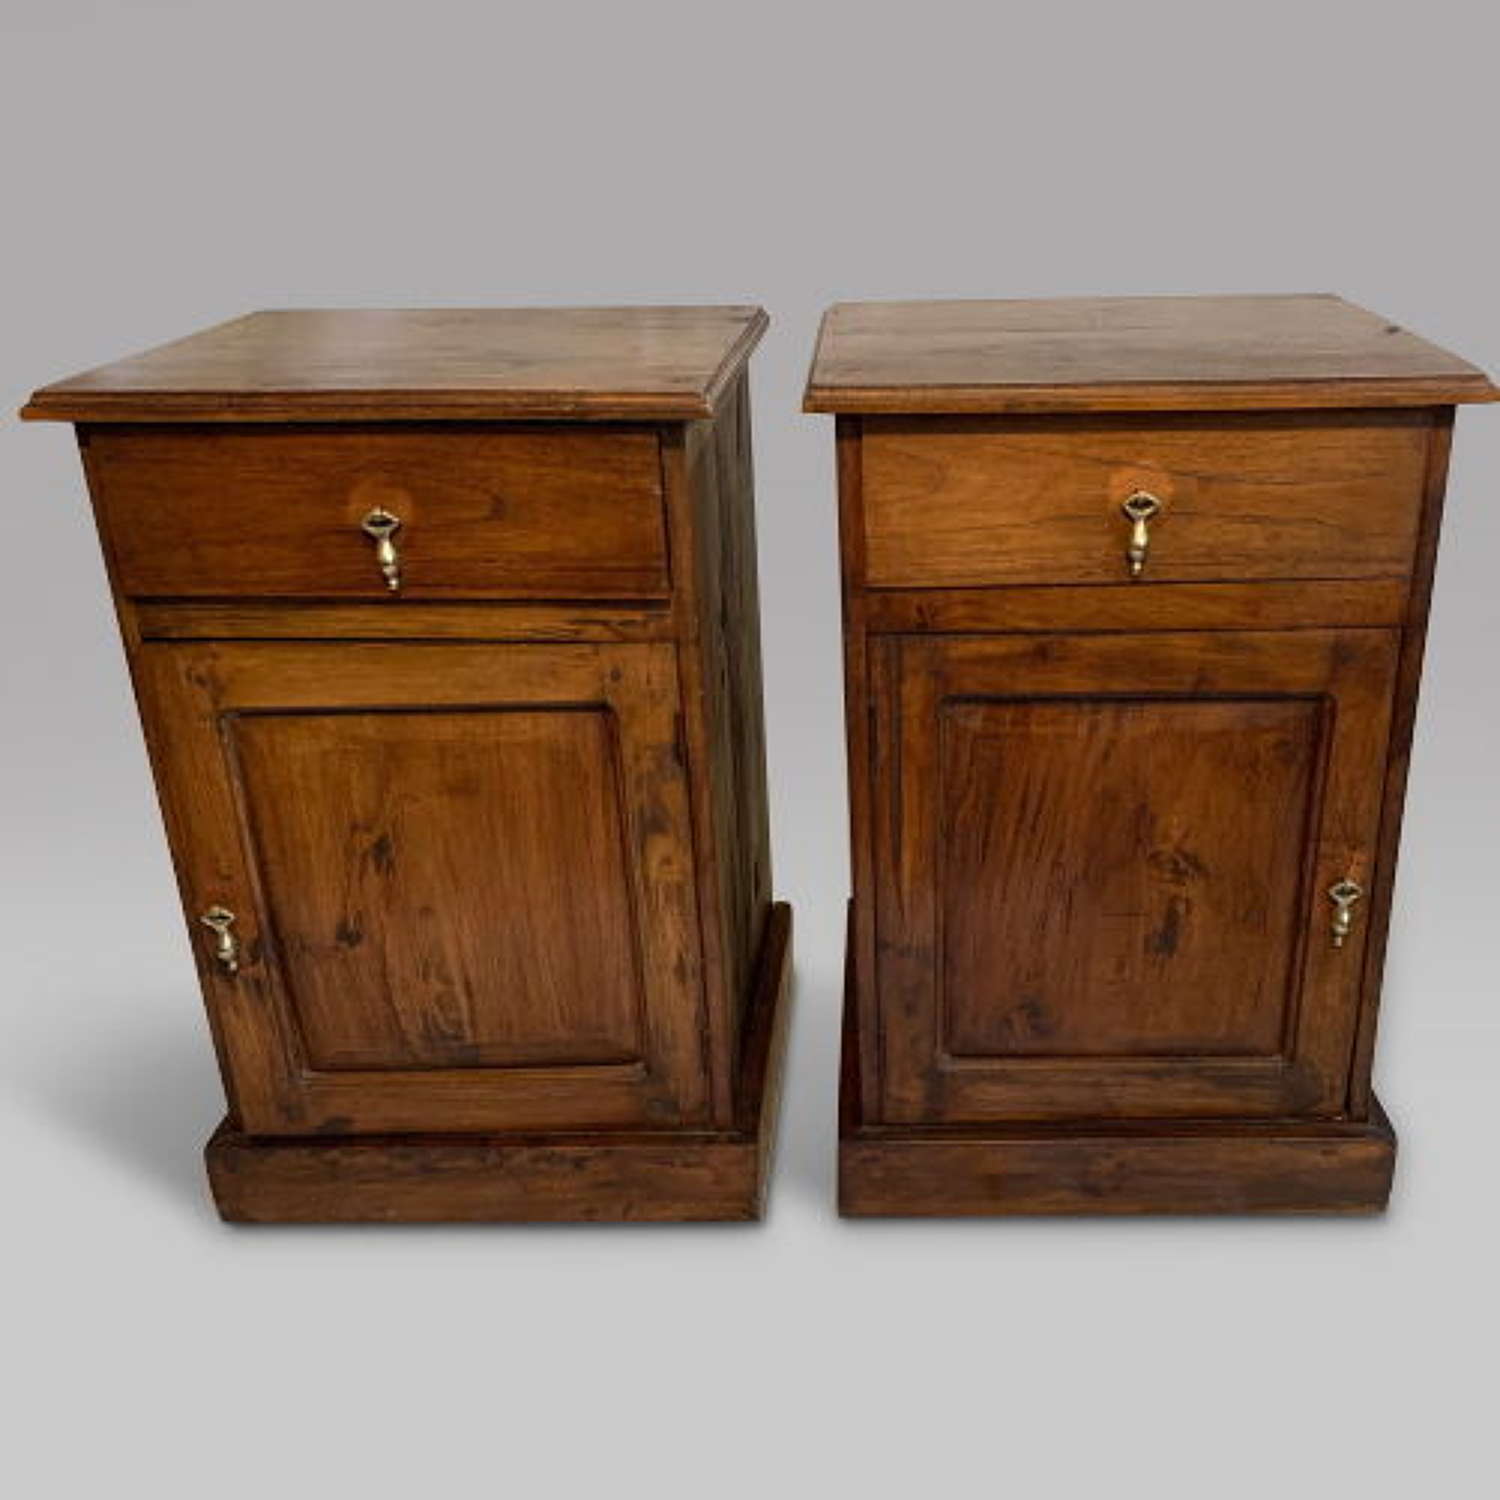 Attractive Pair of Hardwood Bedside Tables